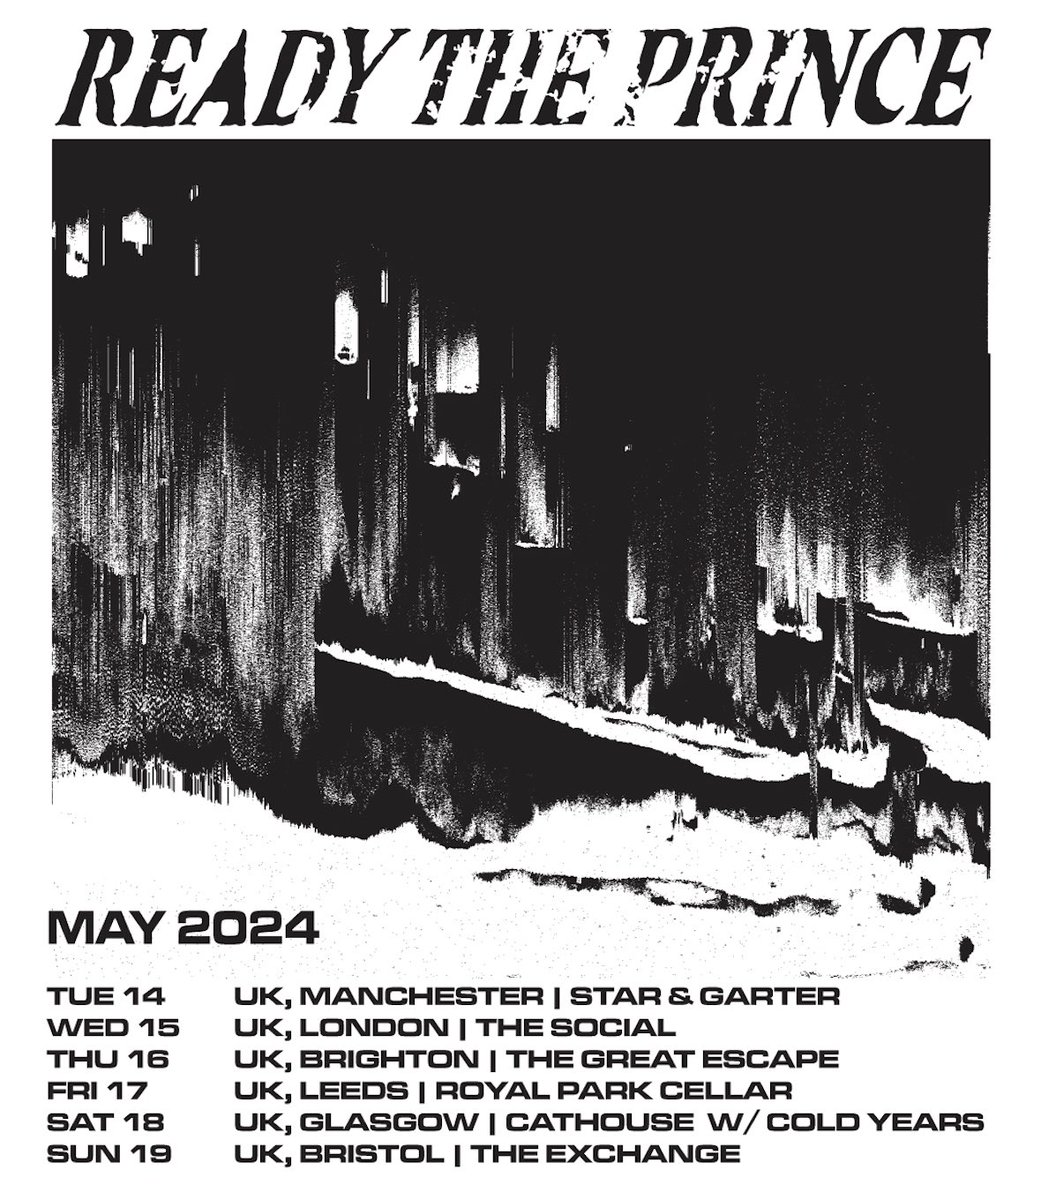 Off the back of their extremely successful tour with Dead Poet Society, @ReadythePrince head out on their first ever headline tour outside of Canada! Tickets on sale on Friday - 10am